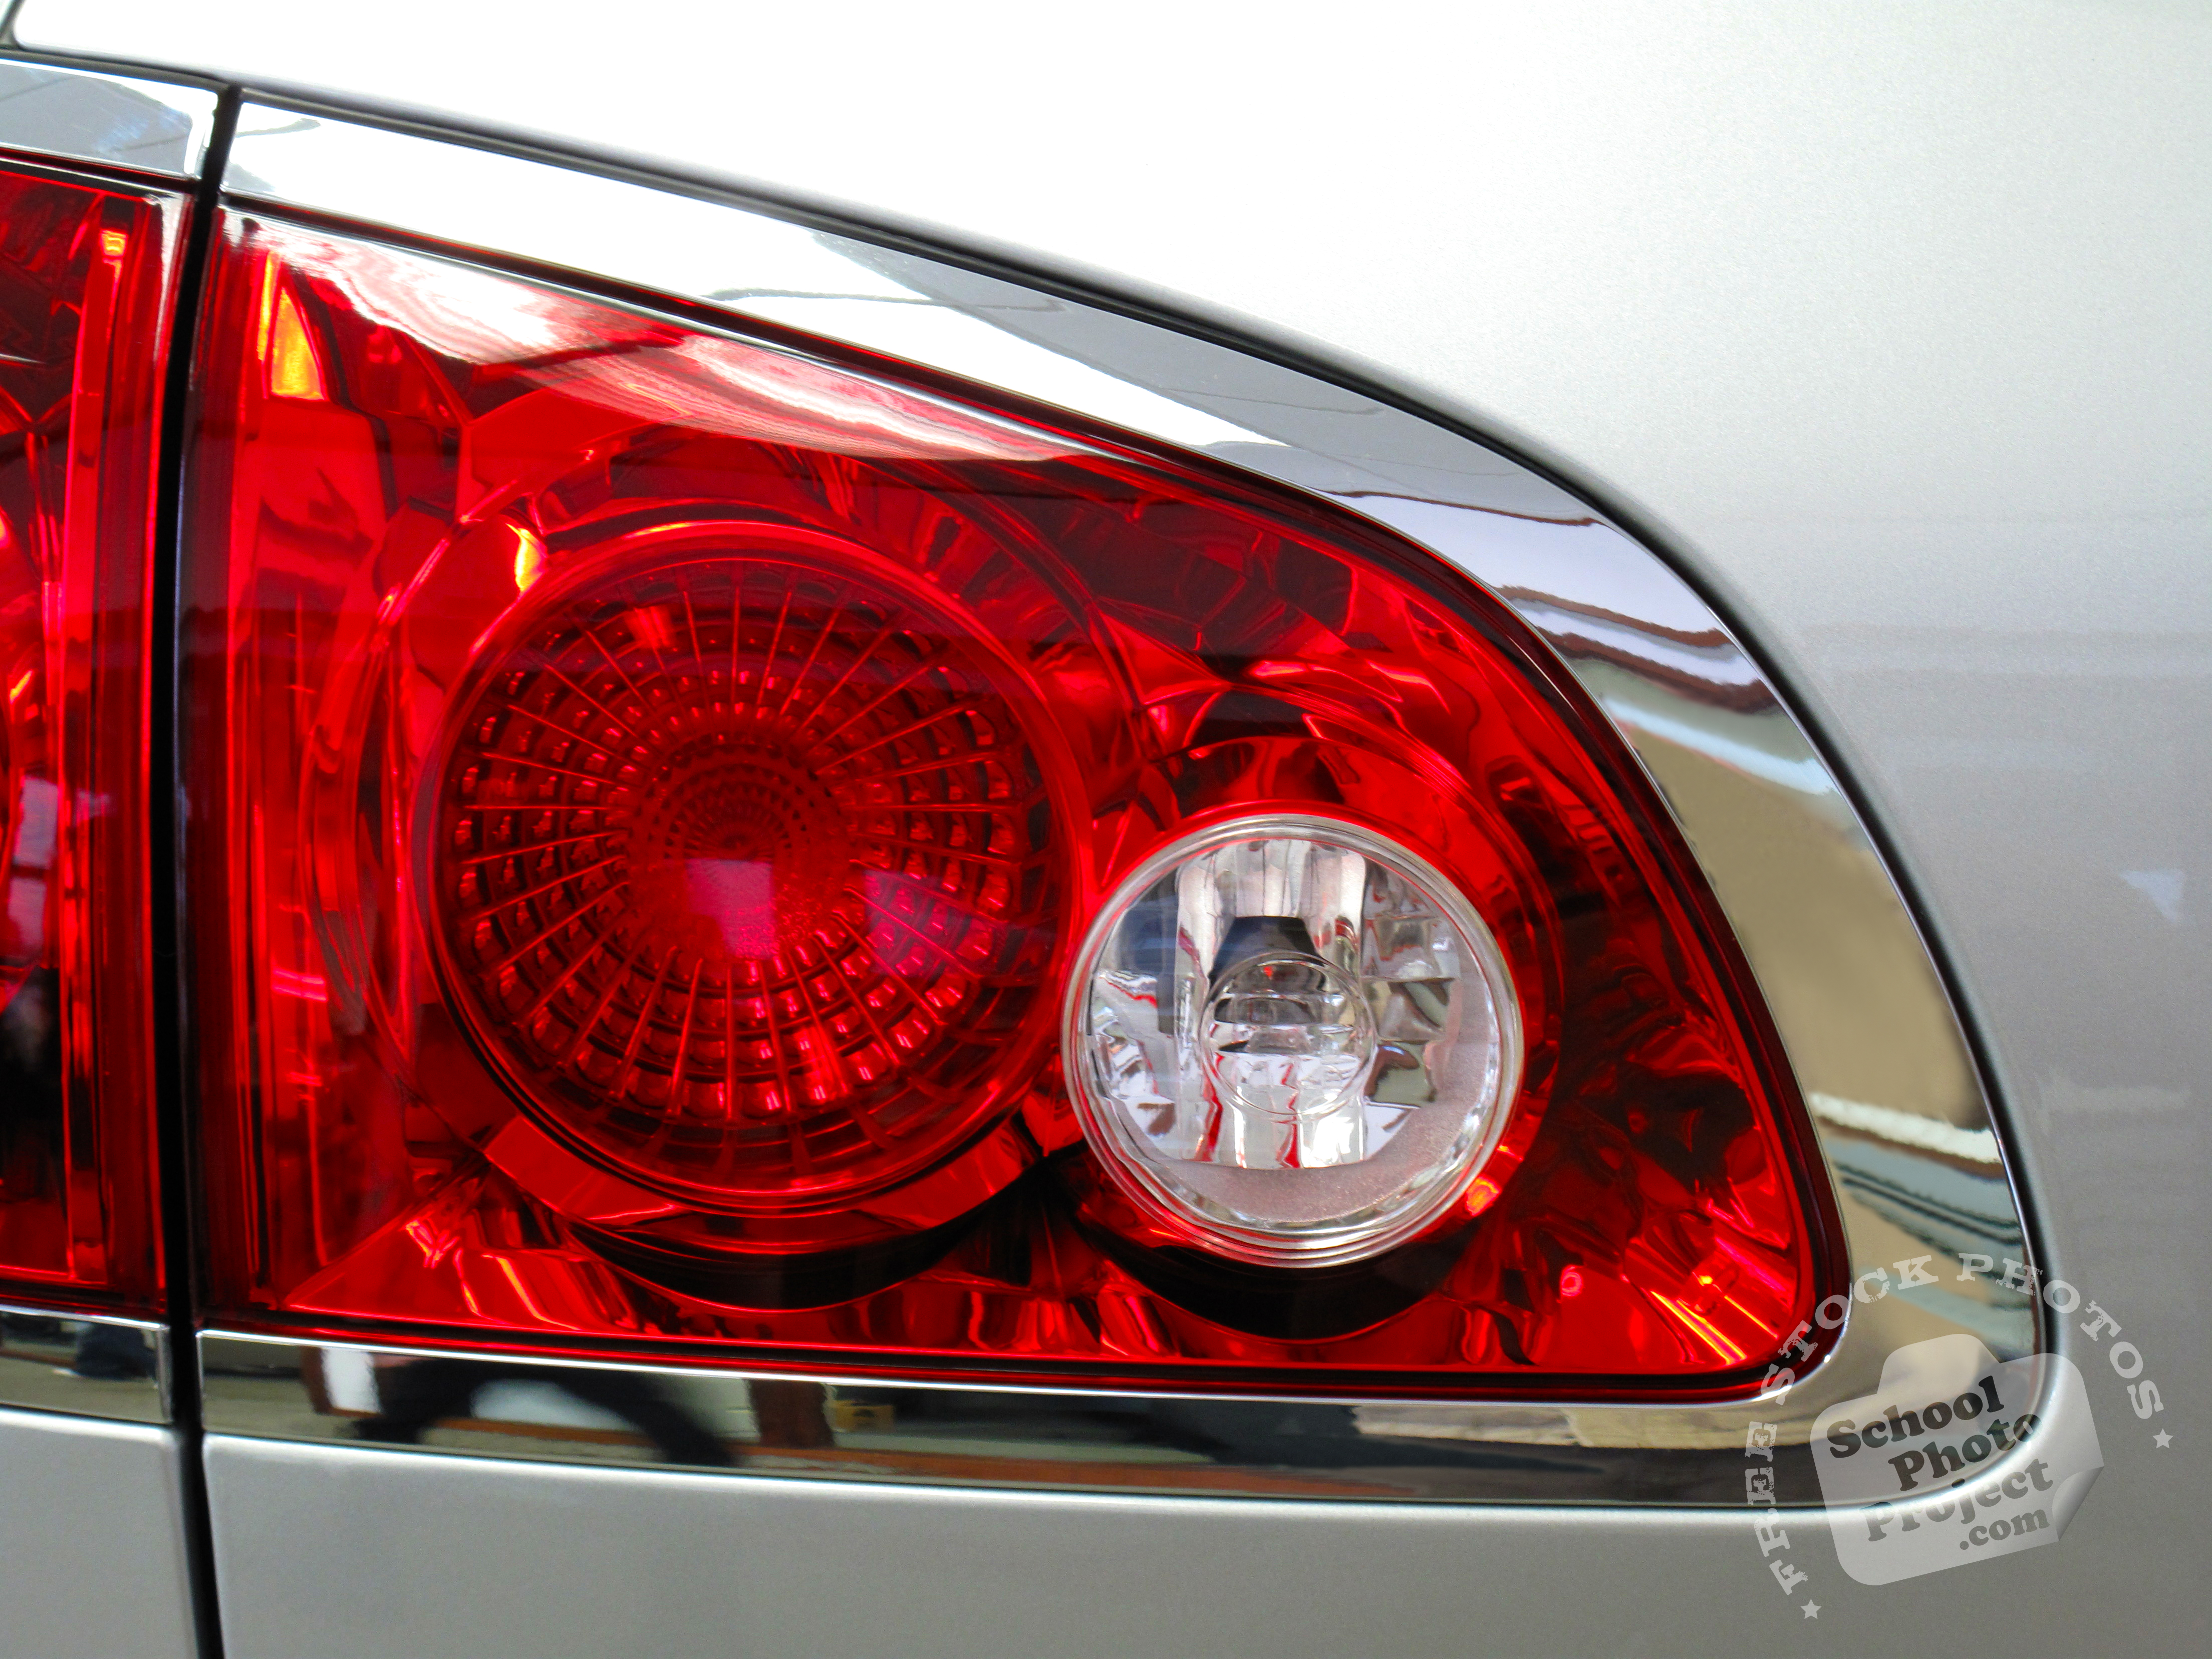 Tail Light, FREE Stock Photo, Image, Picture: Car Tail Light ...